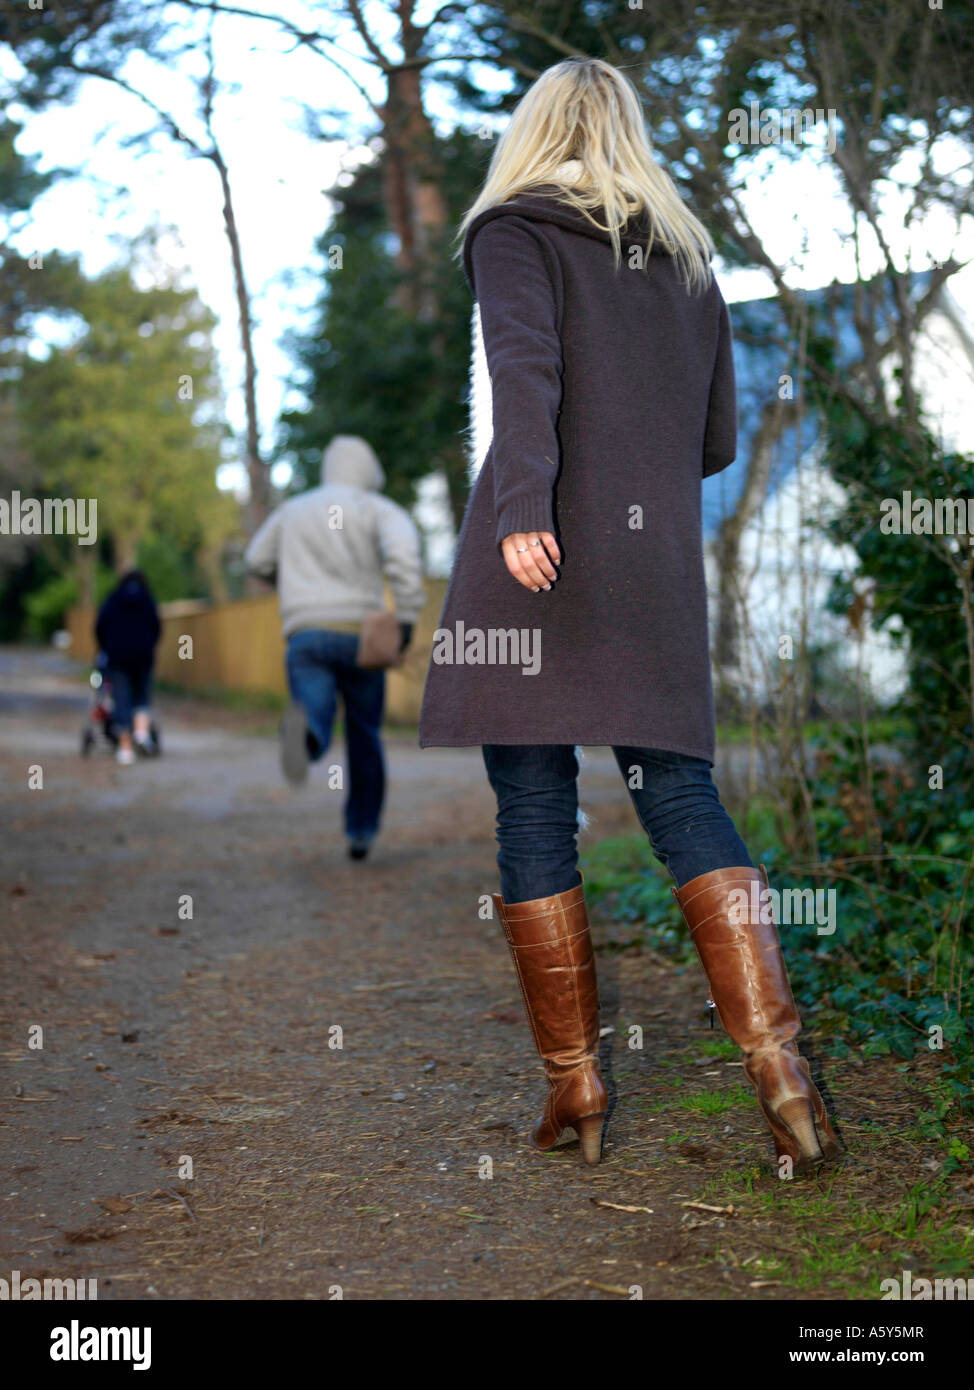 Young Woman Walking On A Quiet Public Path Being Threatened By A Mugging Robbery And The Threat Of Increasing Knife Crime By A Young Male Attacker Stock Photo